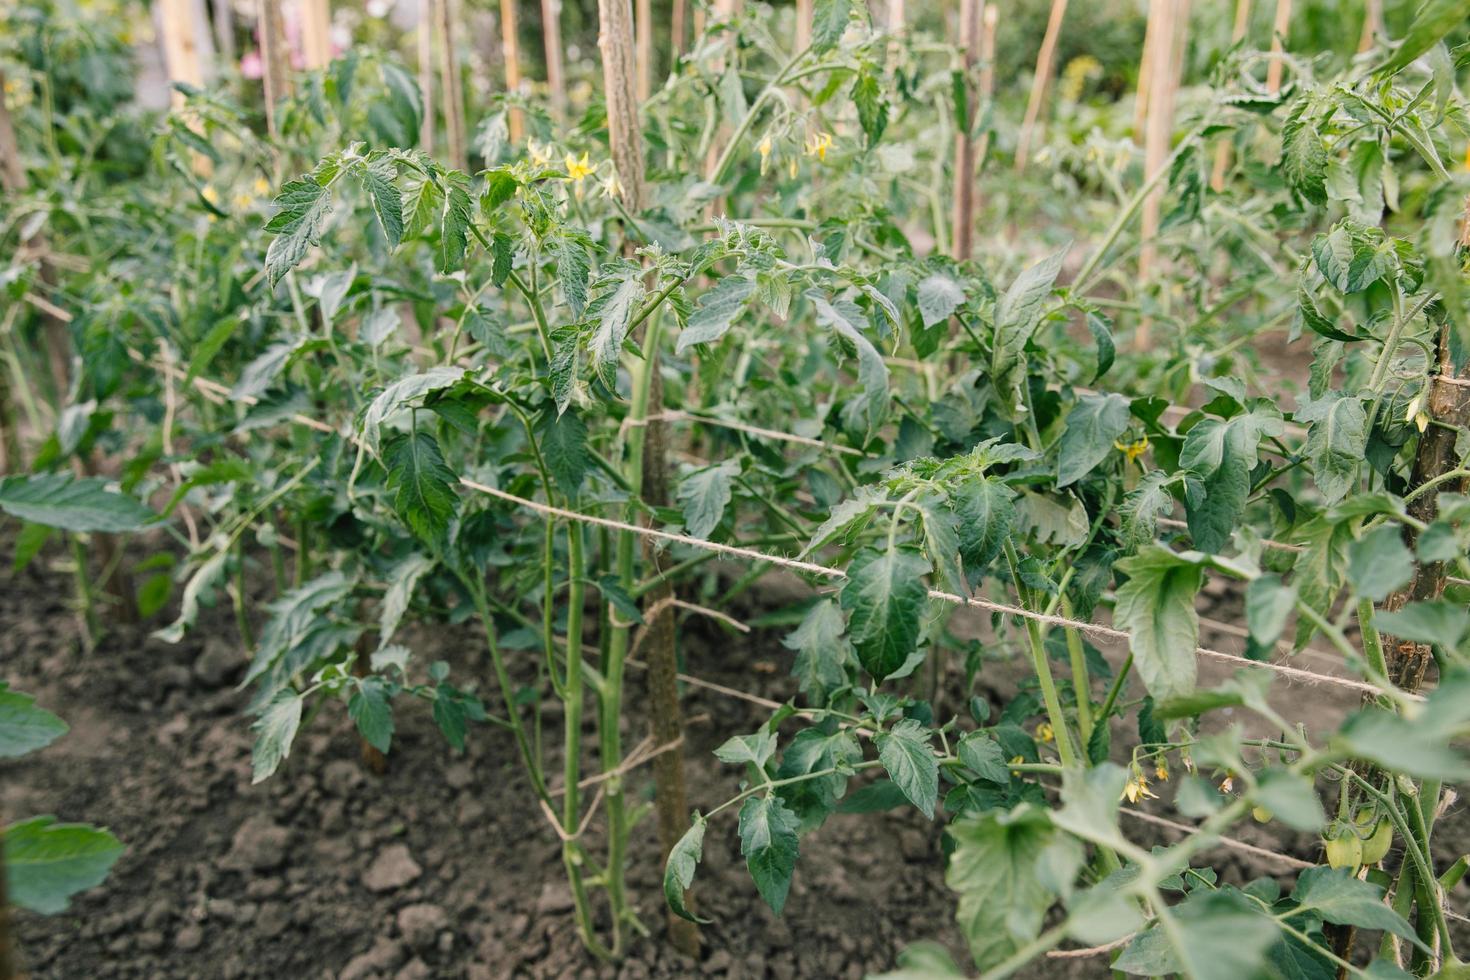 Young tomato plant in open ground in vegetable garden Vegetable growing photo